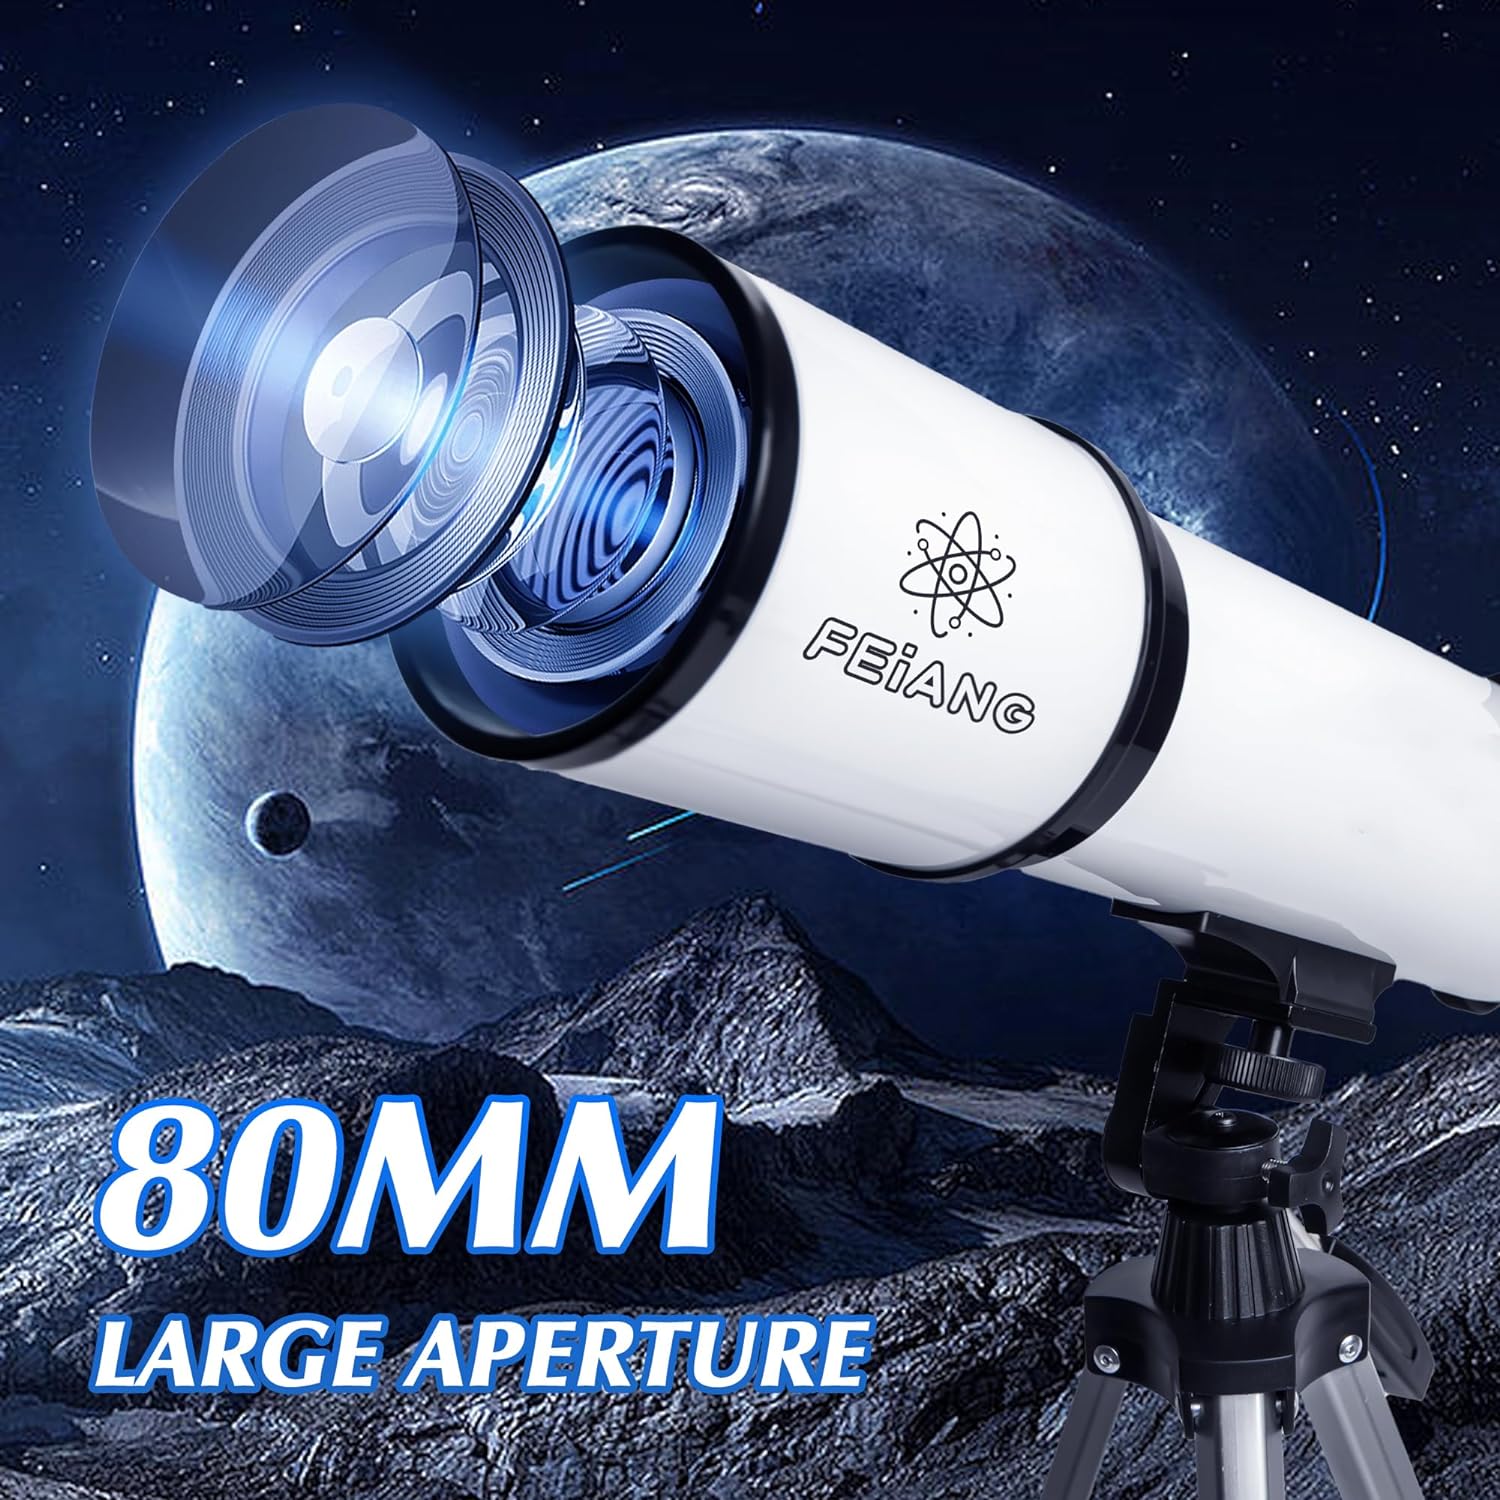 FEiANG Beginners & Adults Astronomical Refracting Telescopes Review